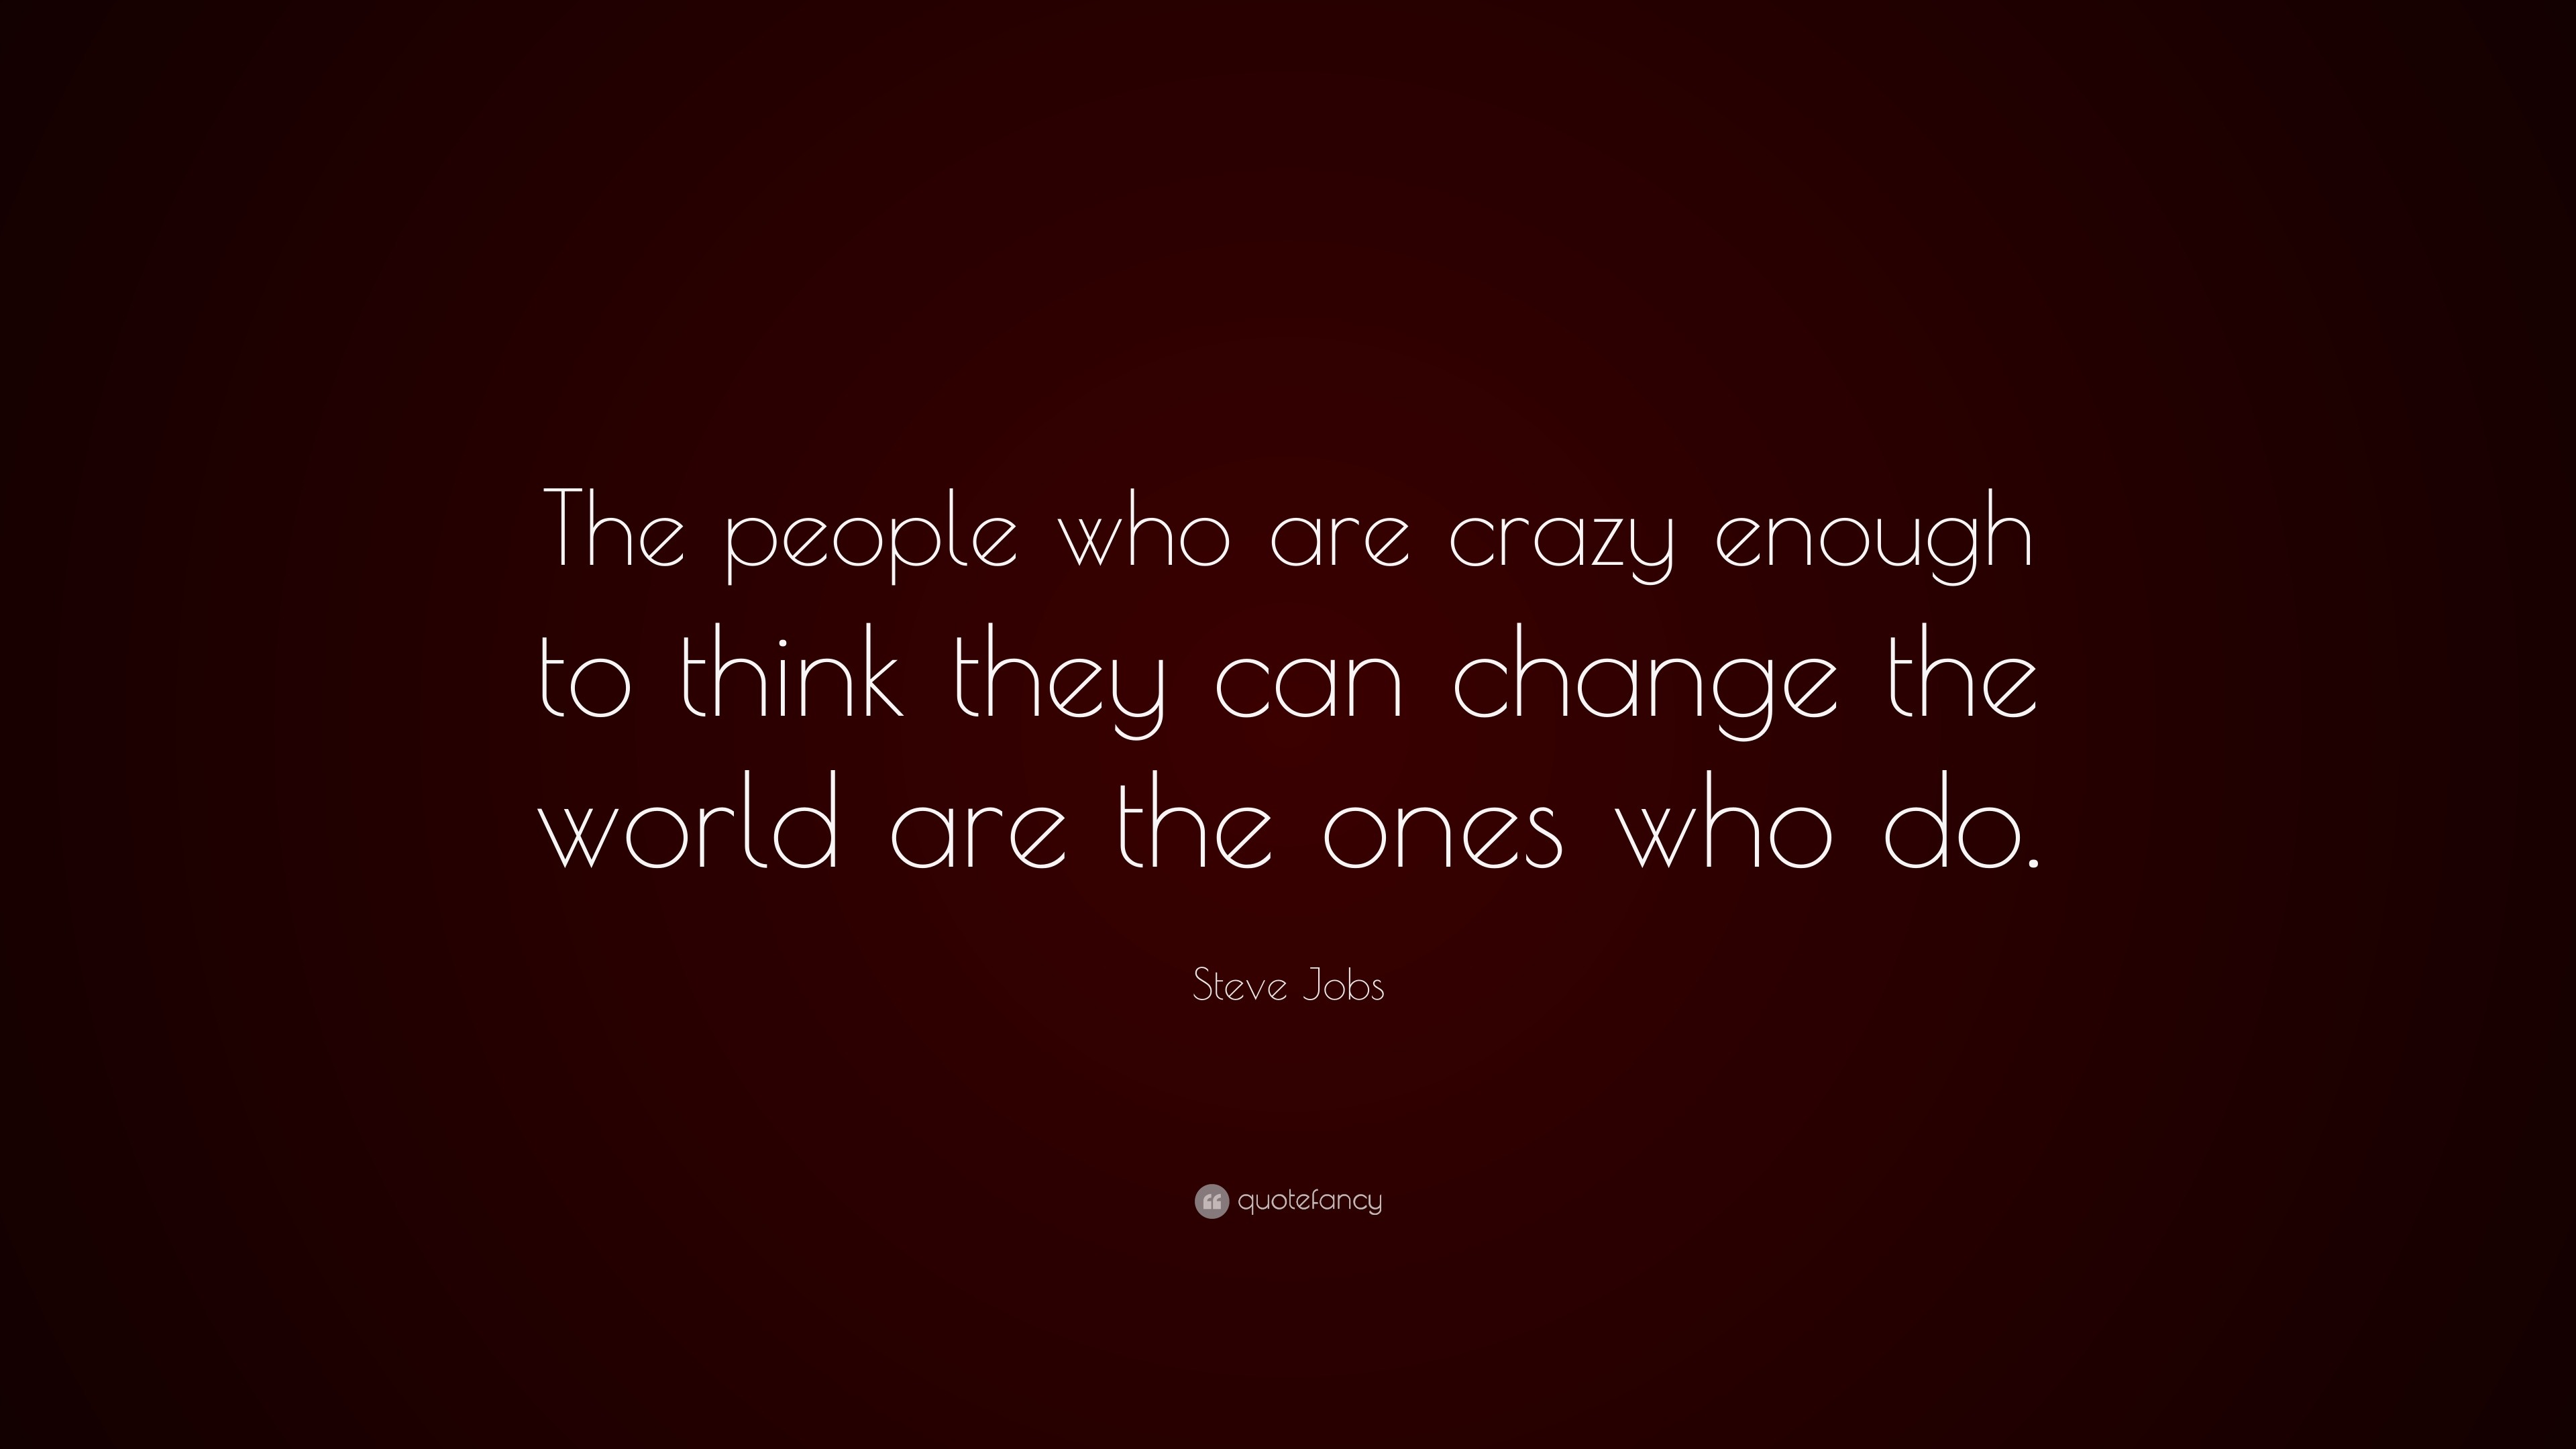 One who has the world. Стив Джобс the people who are Crazy enough. Steve jobs the ones who are Crazy. Стив Джобс because the people who are Crazy. The people who are Crazy.